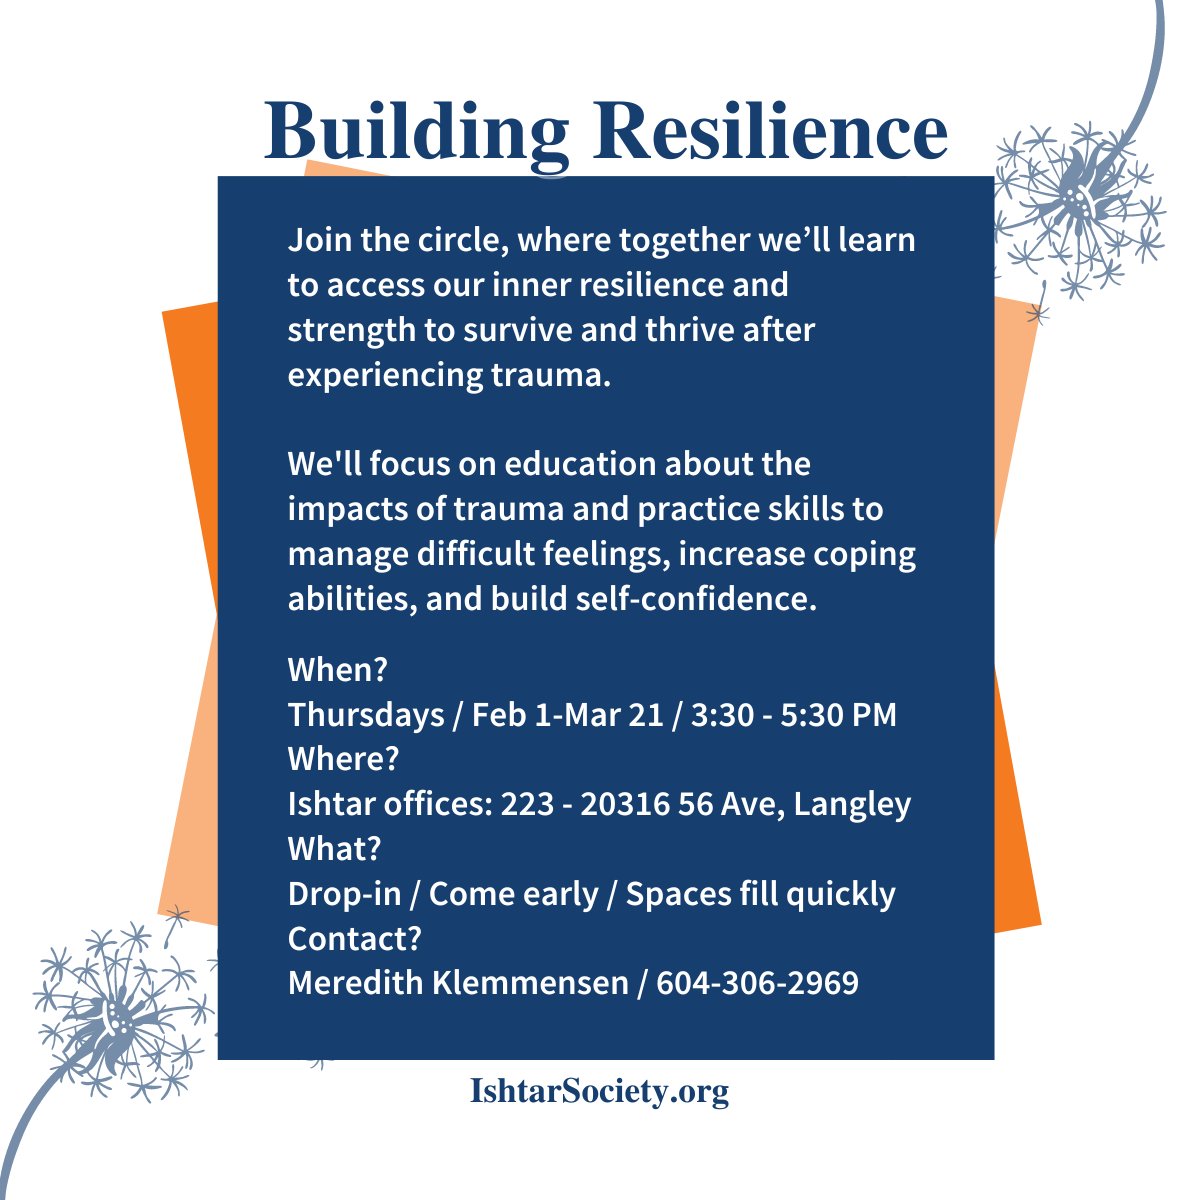 Feb 15
#BuildingResilience
🧡 Thursdays
🧡 3:30-5:30 PM
🧡 604-306-2969
#JoinTheCircle
We'll learn about the impacts of trauma and practice skills to
☑️ manage difficult feelings
☑️ increase coping abilities
☑️ build self-confidence
IshtarSociety.org

#LangleyBC #EndAbuse